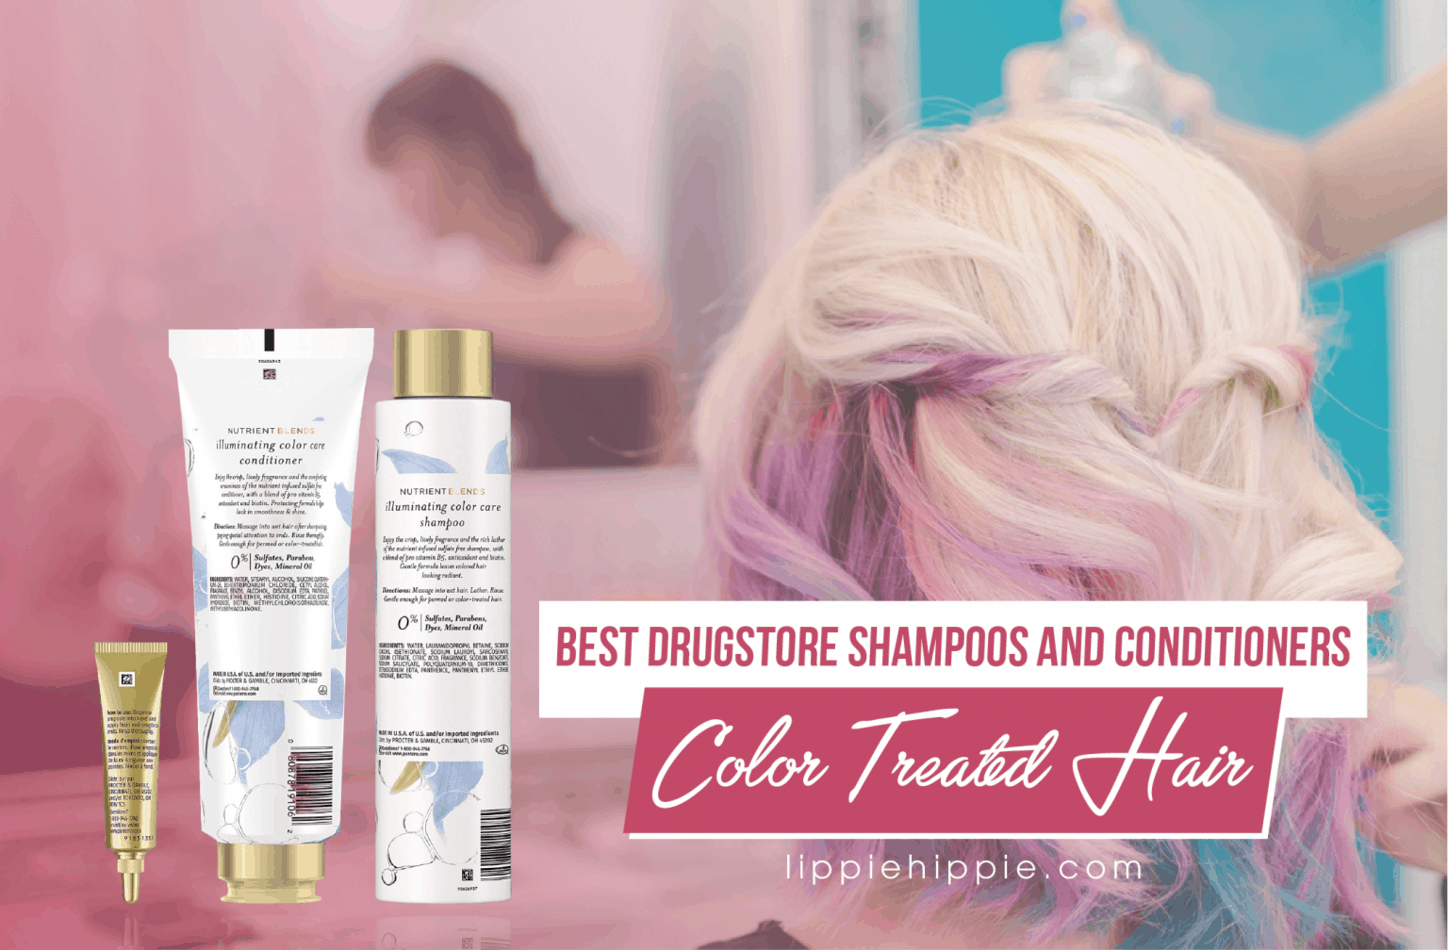 9. The Best Blue Shampoos for Color-Treated Hair - wide 8